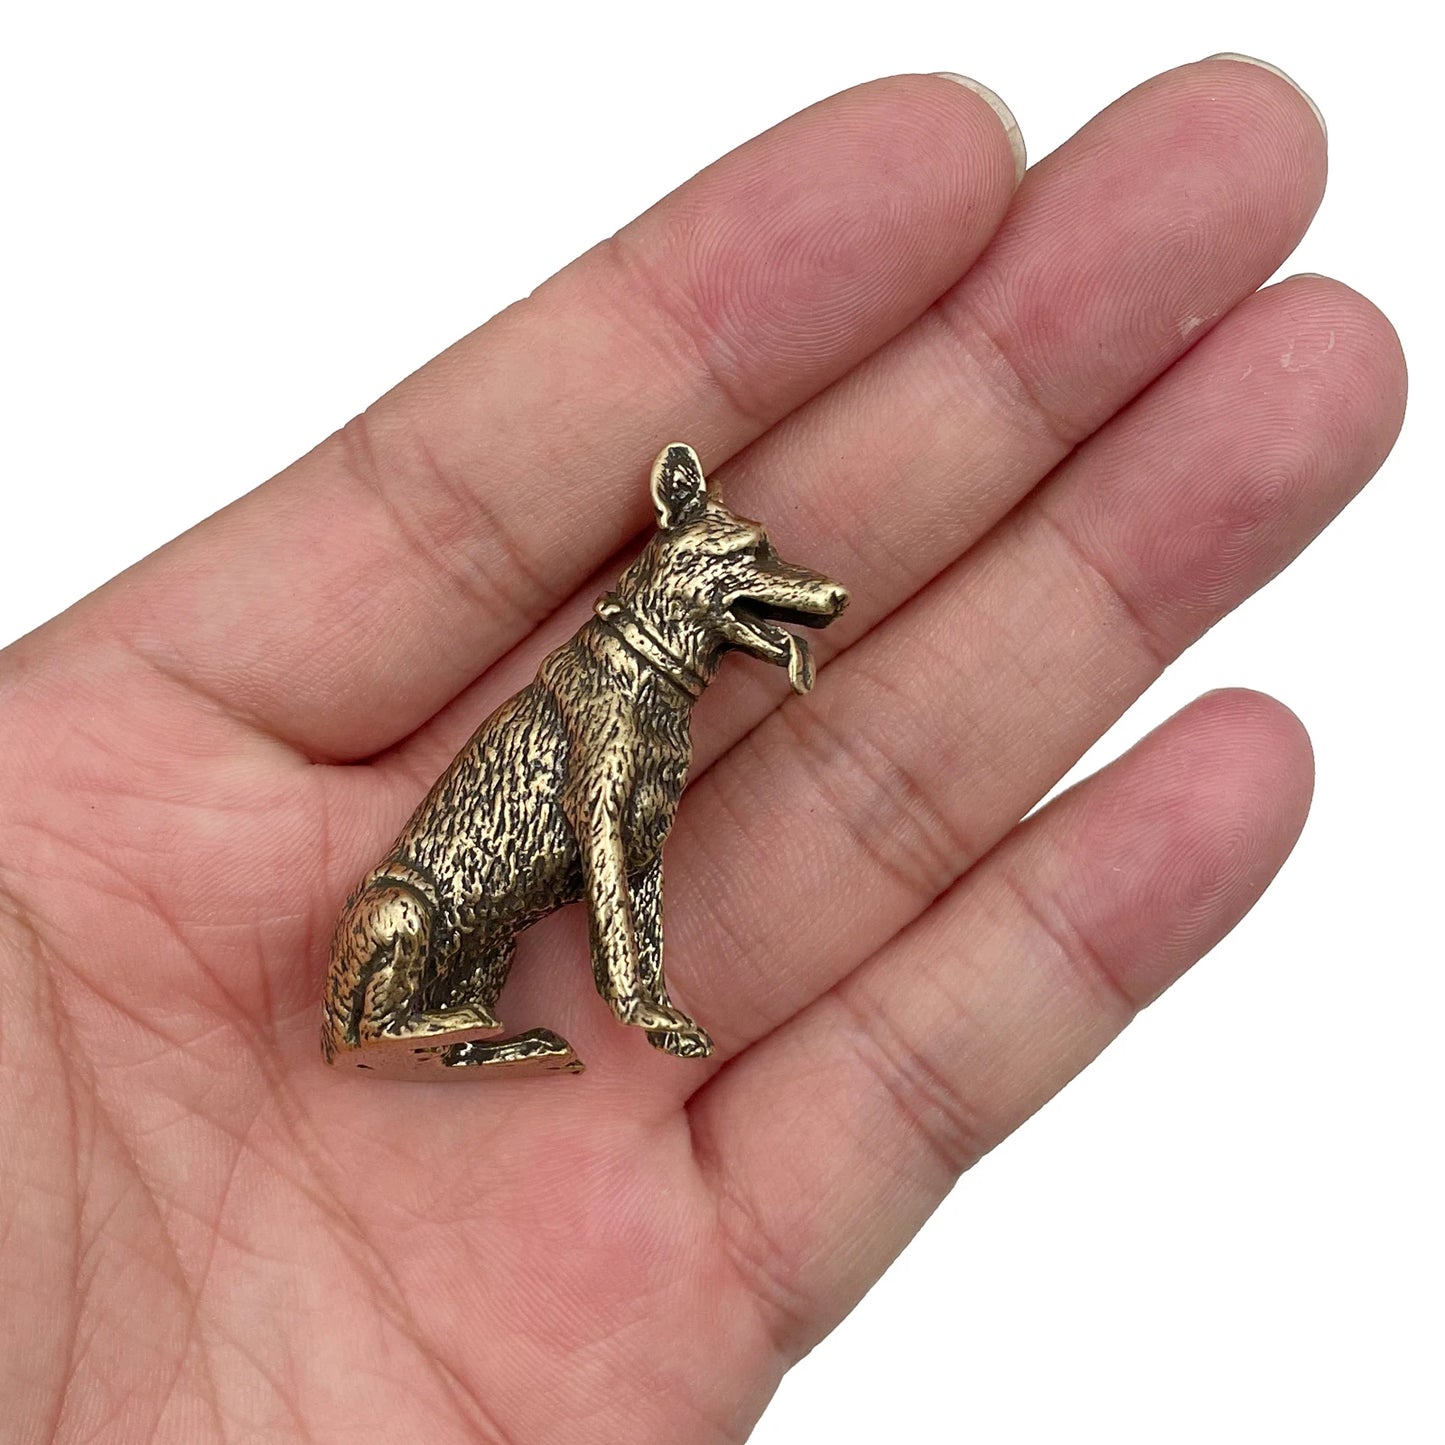 Brass Lucky Fortune Dog Home Decoration Small Ornaments Little Puppy Bronze Chinese Desktop Small Figurines Copper Wolf Tea Pets